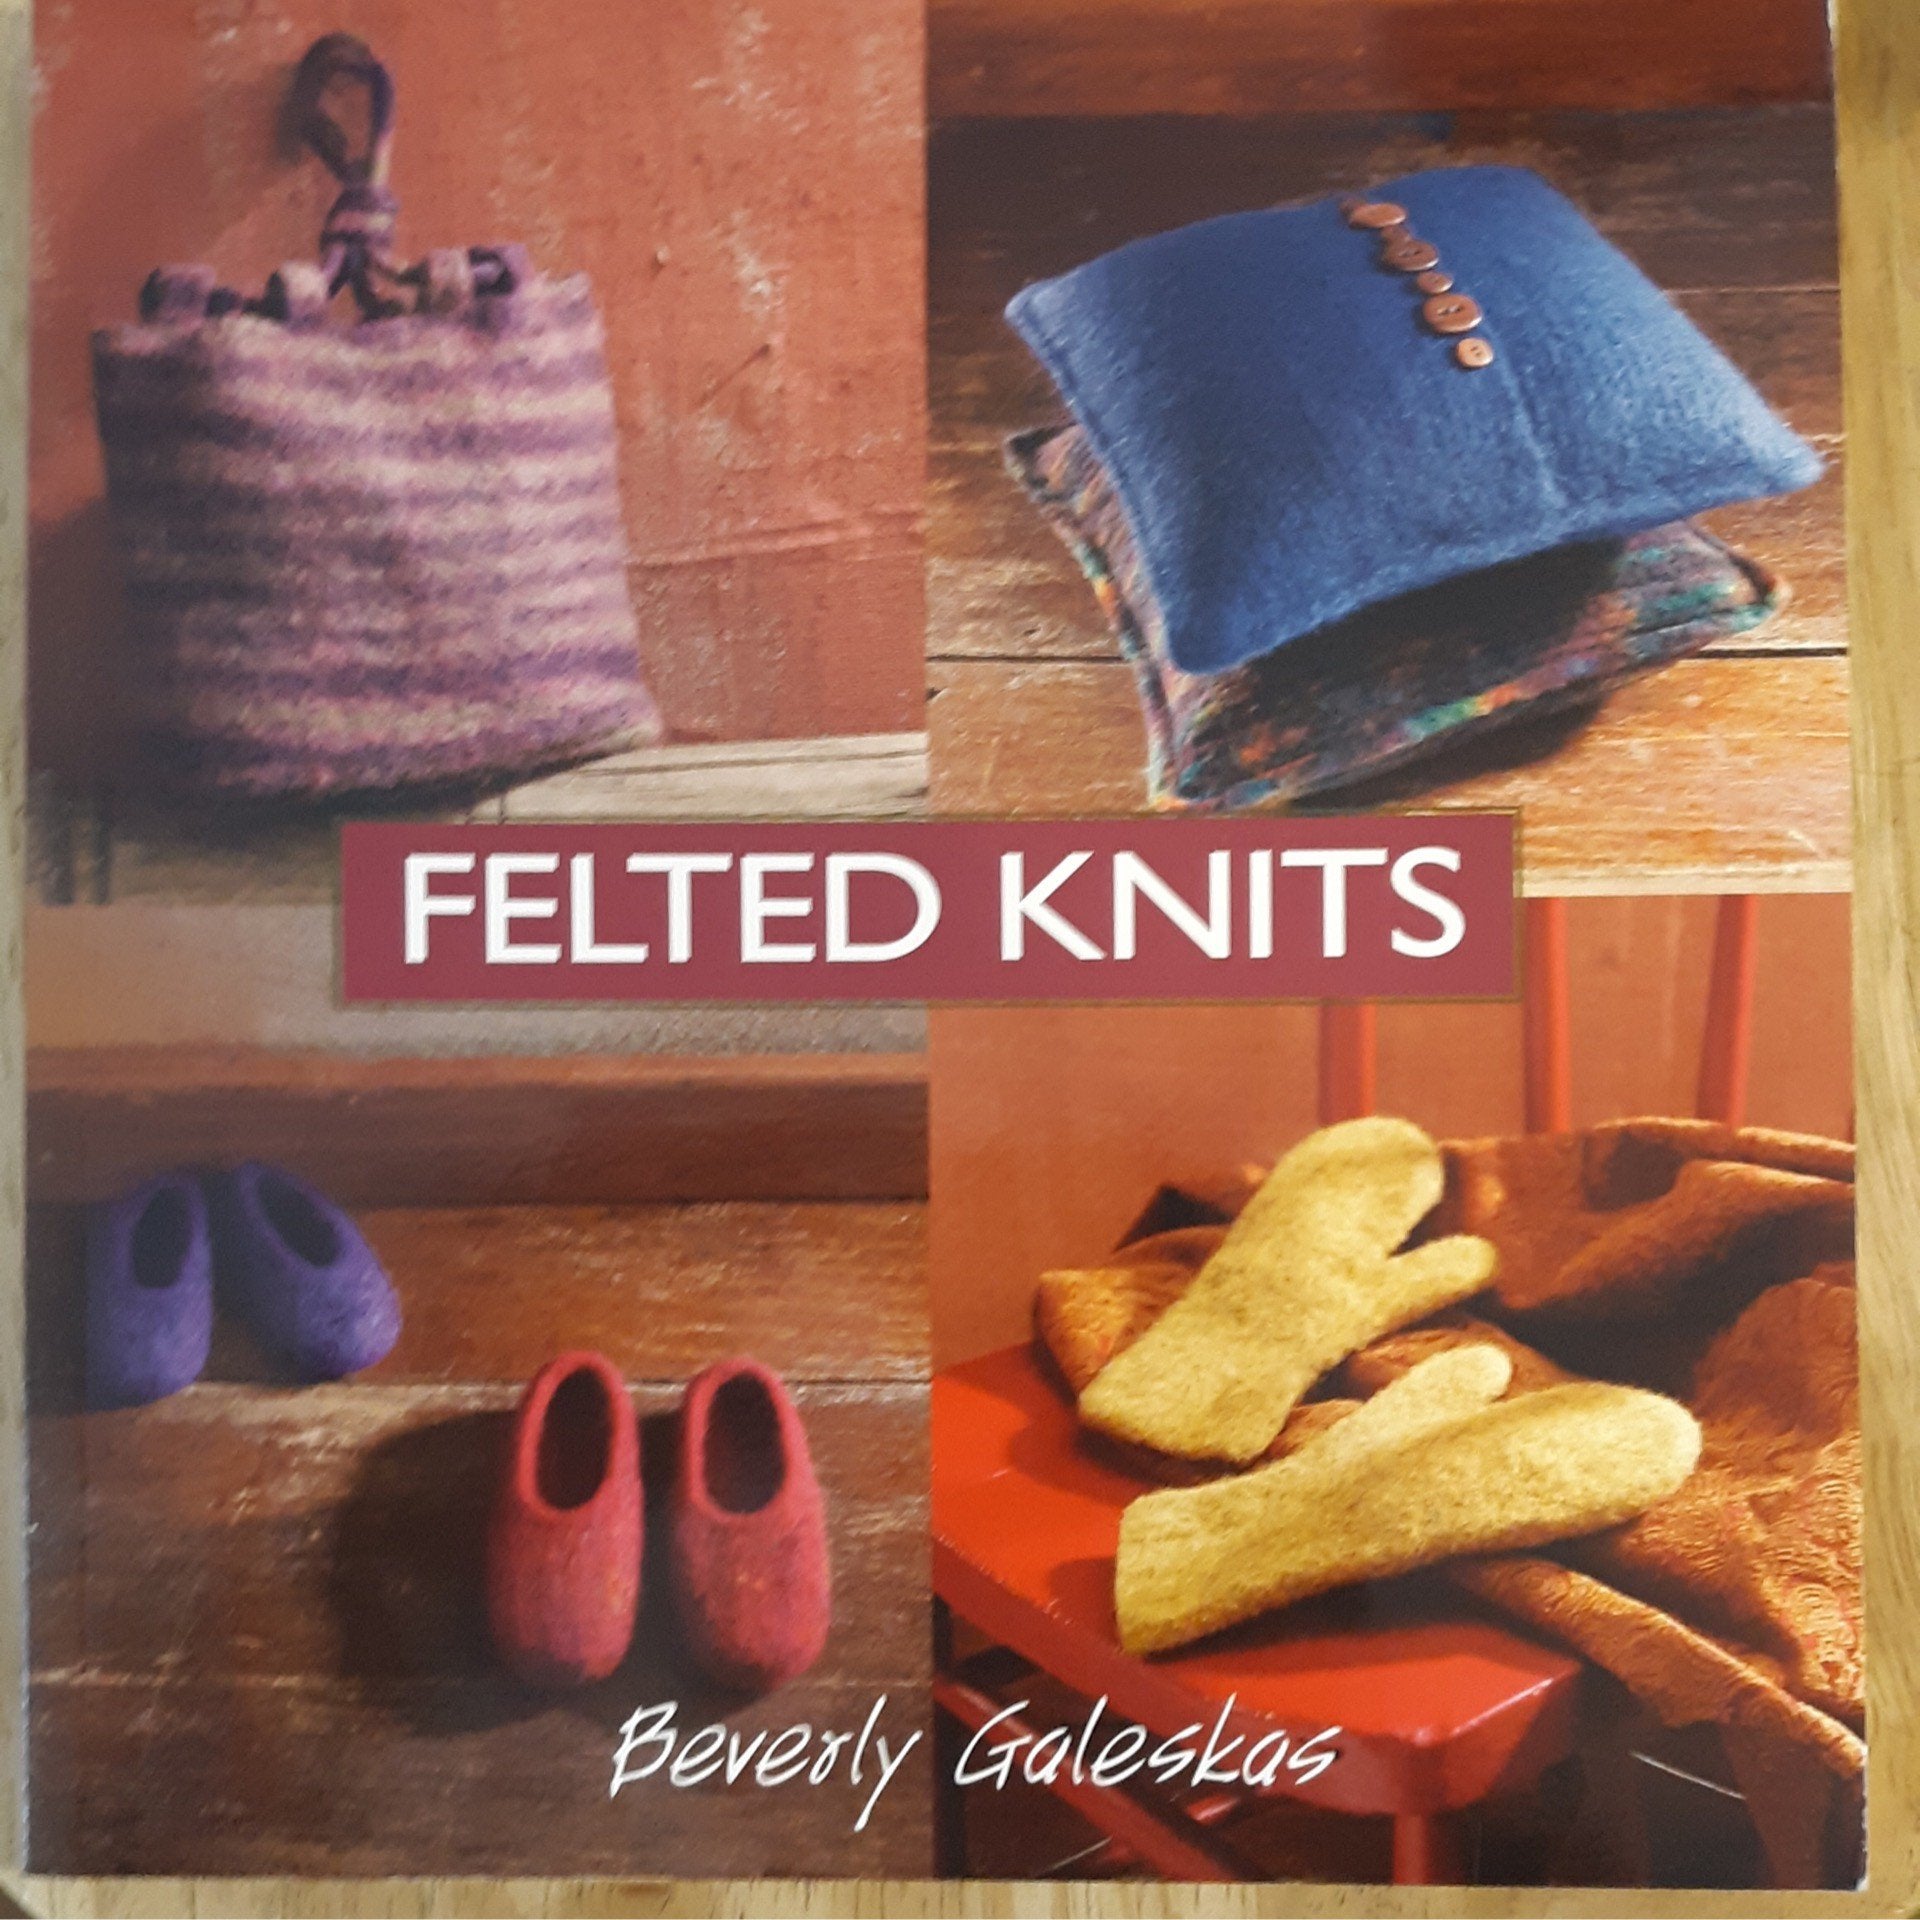 Felted Knits by: Beverly Galeskas